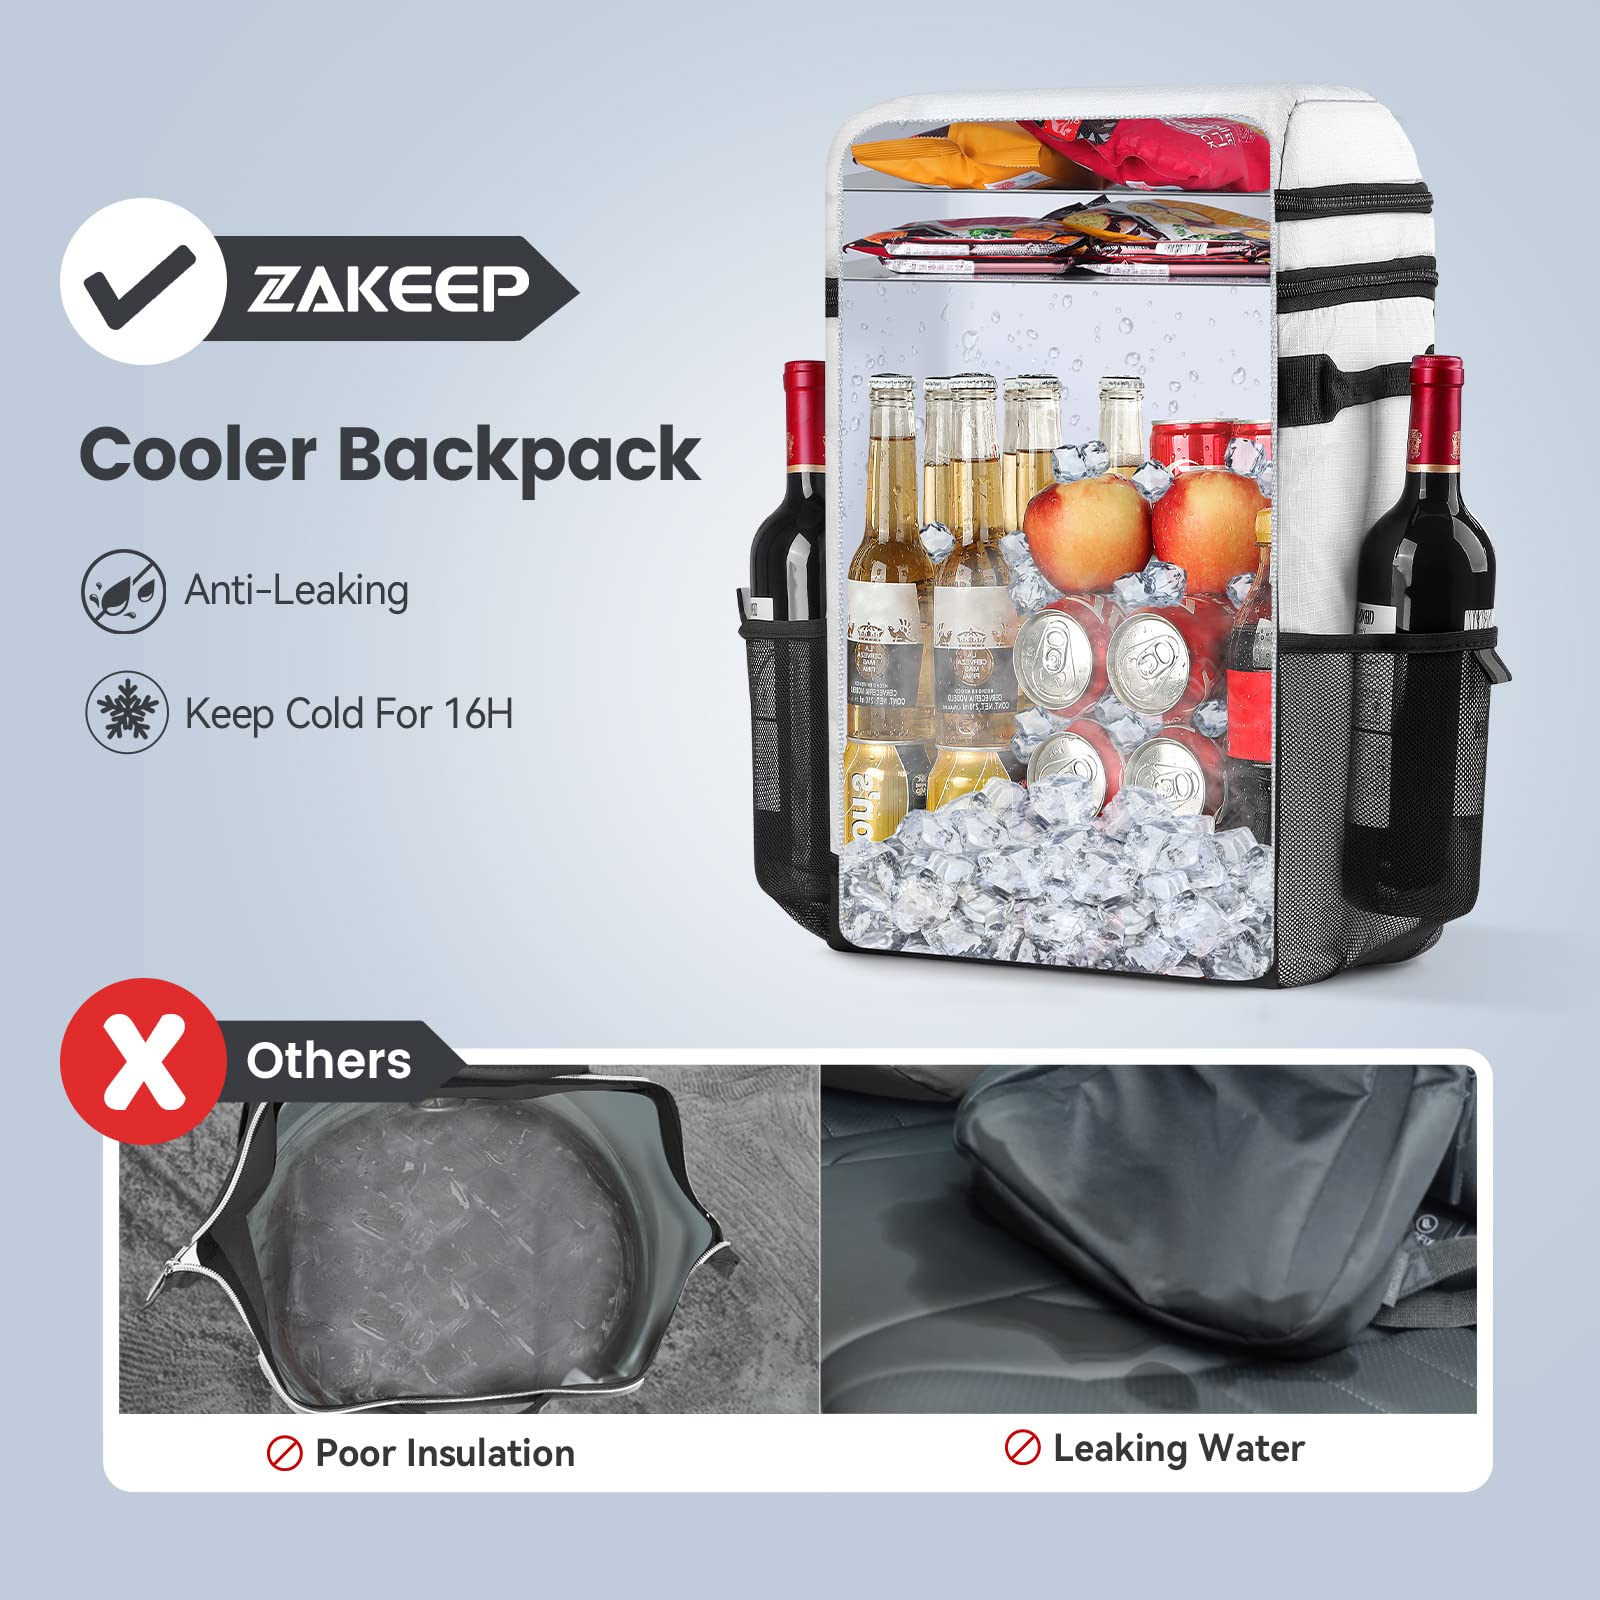 ZAKEEP Cooler Backpack, 36 Cans Multifunctional Leakproof Cooler Backpack with Padded Top Handle, Mesh Pocket for Camping BBQ